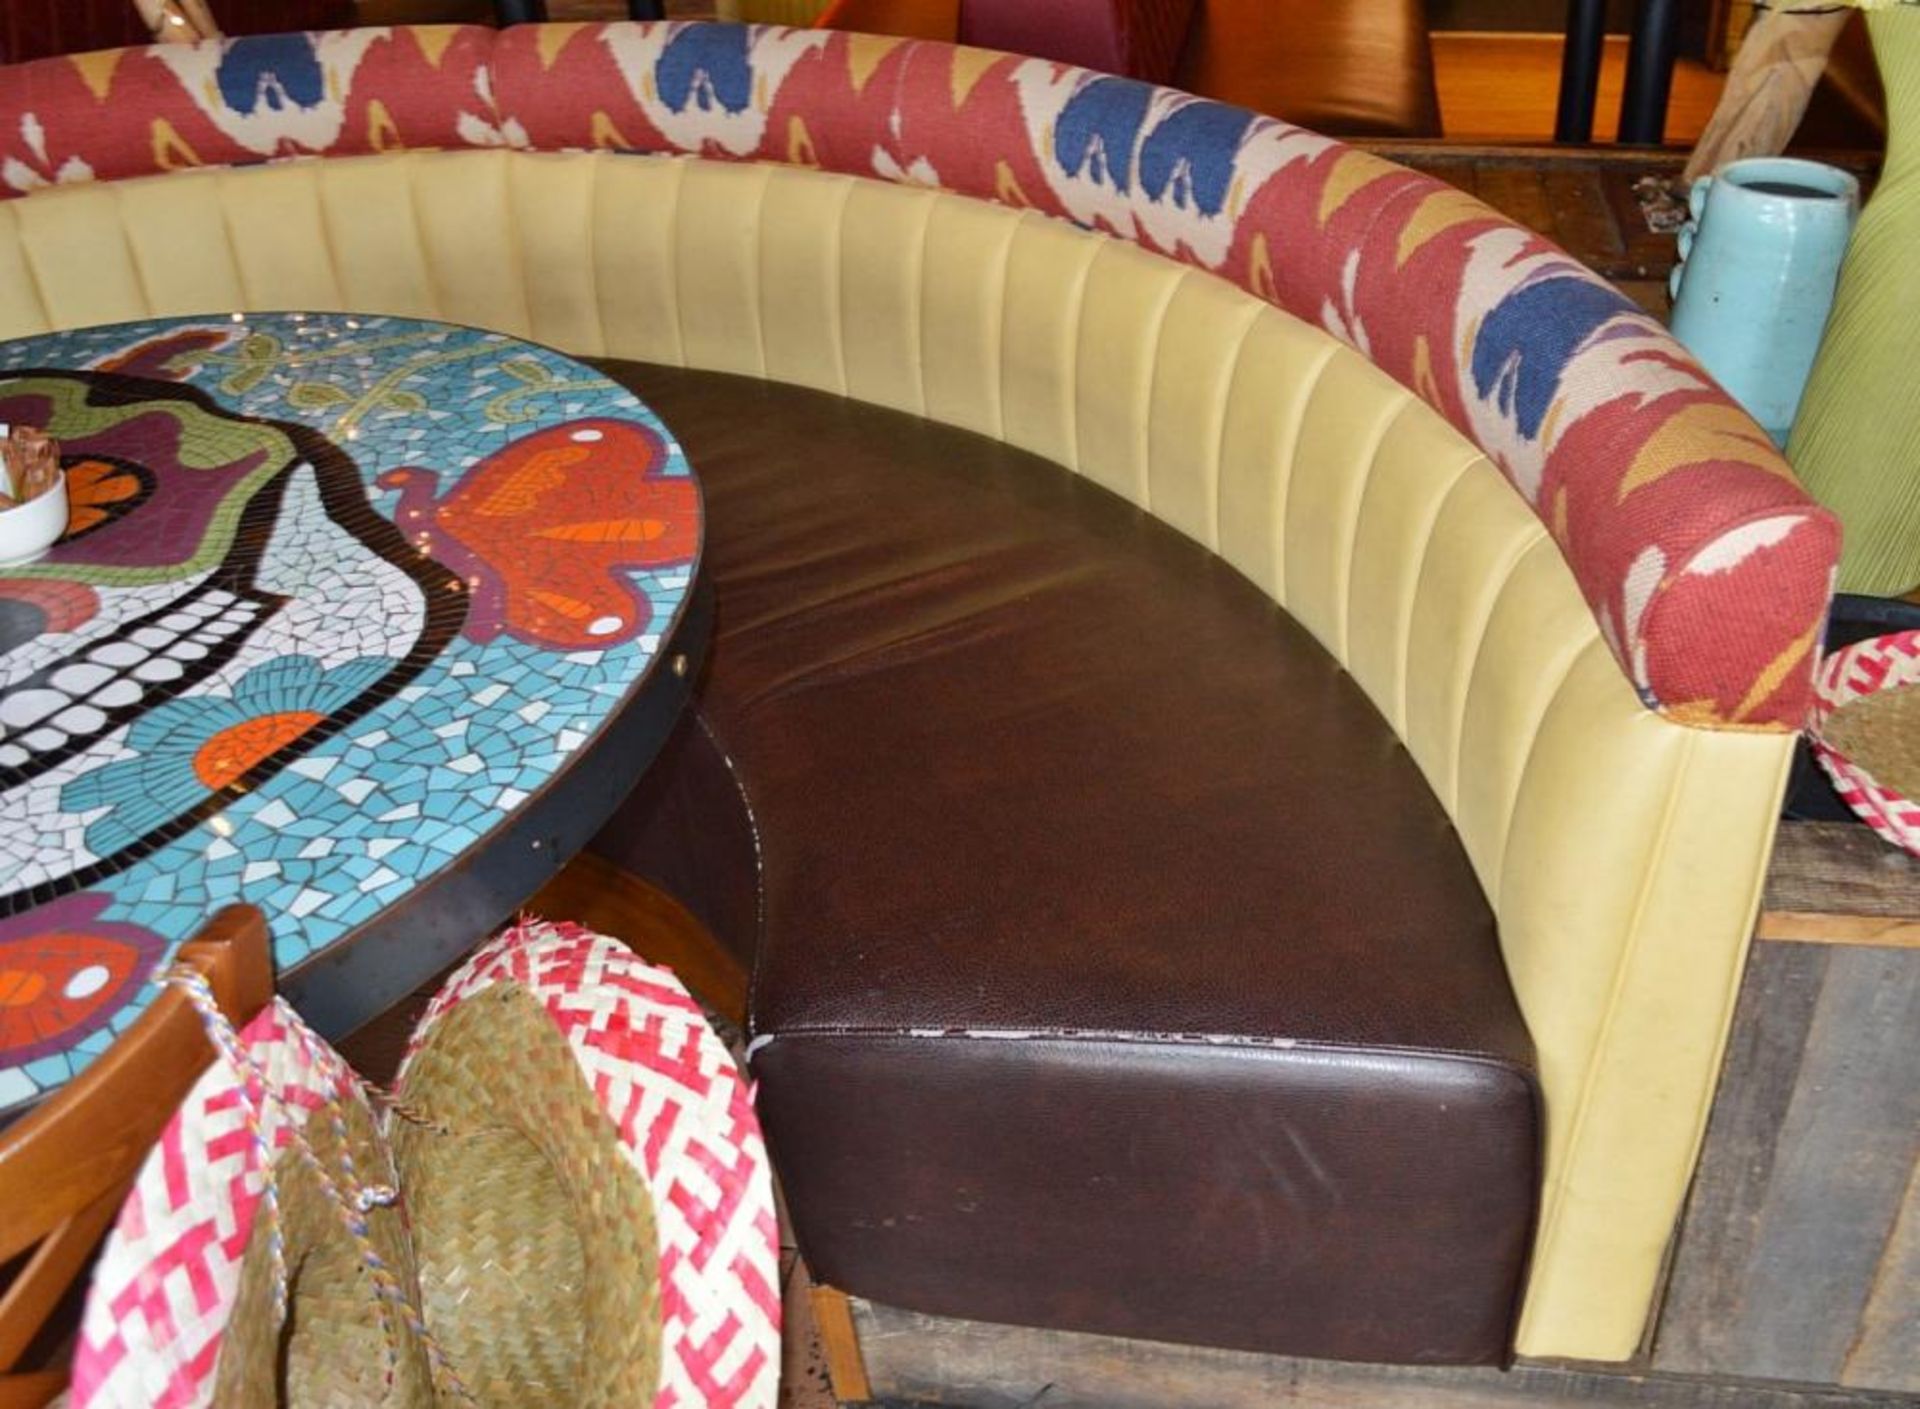 2 x Half Circle Seating Booths / Banquet Seating - Faux Leather Brown Seating With Yellow and Brown - Image 4 of 15